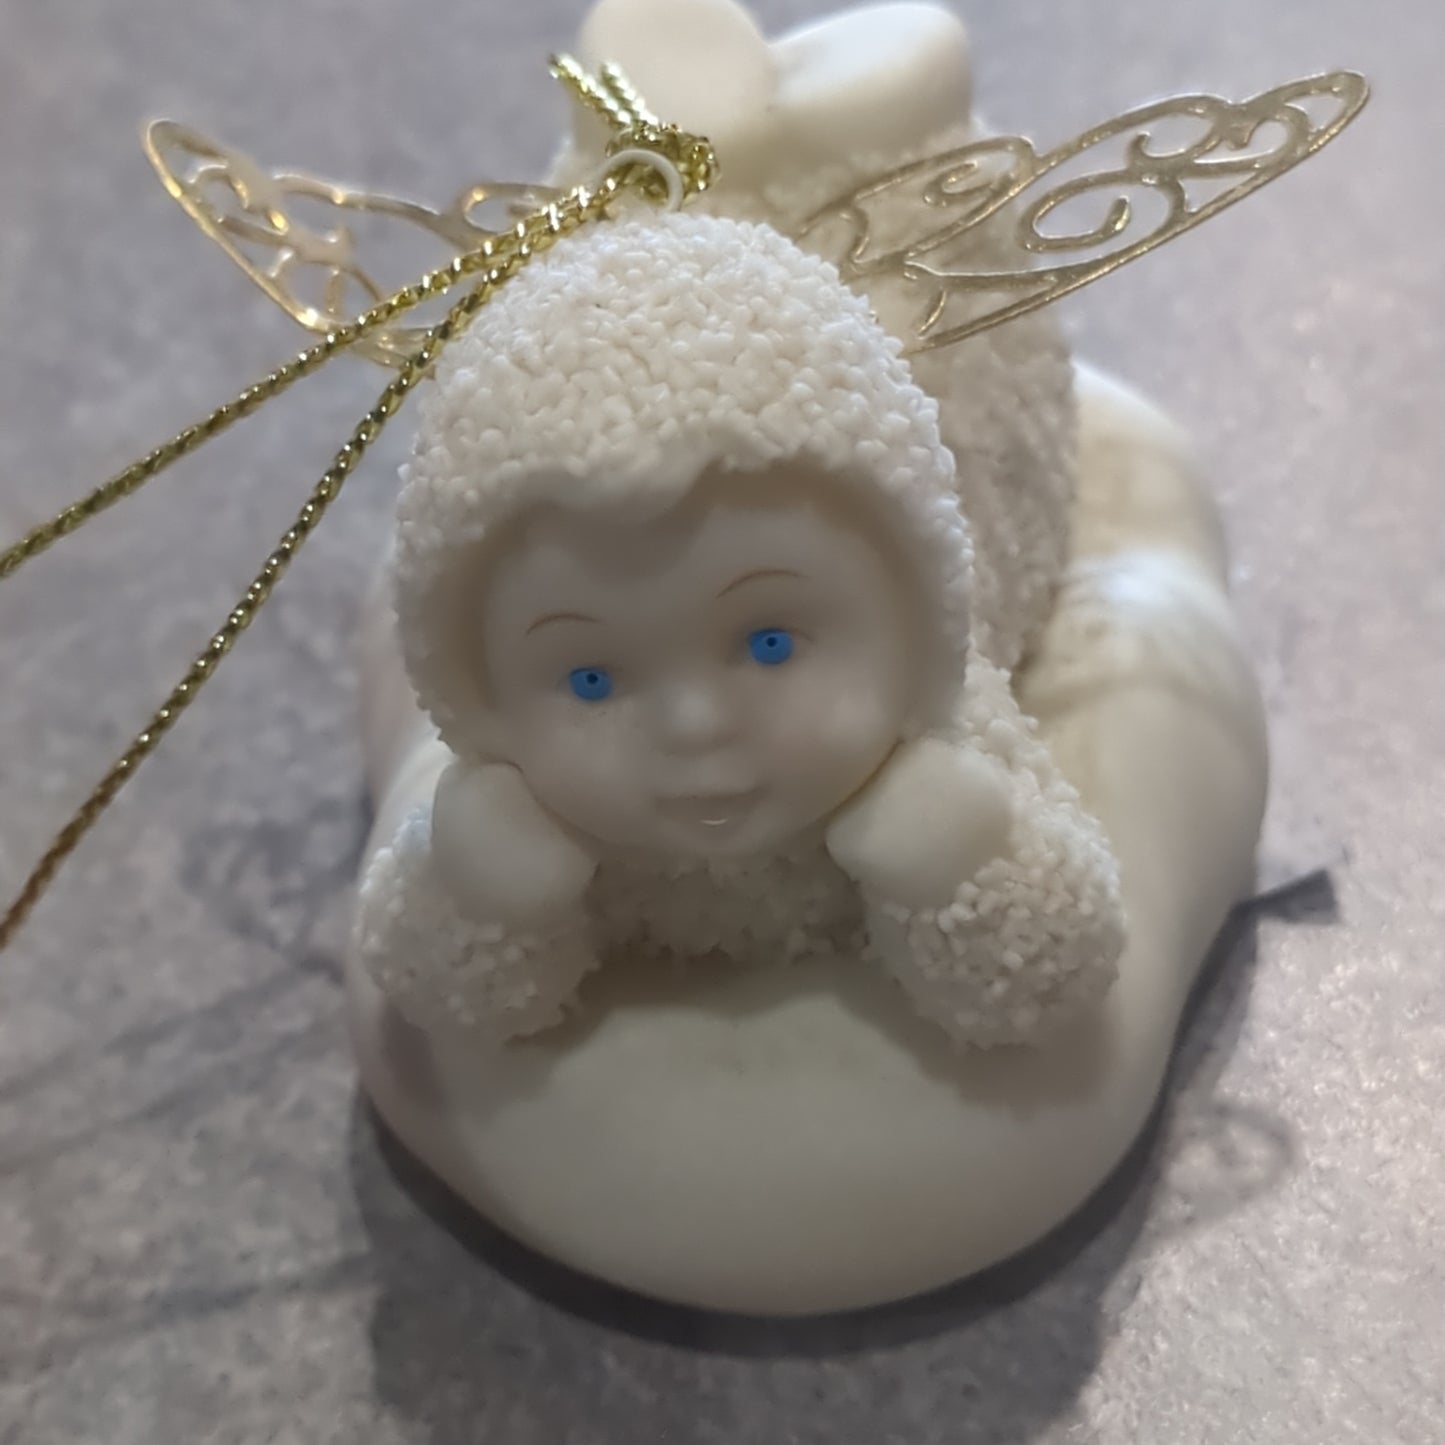 Department 56 snowbabies angel ornament laying down